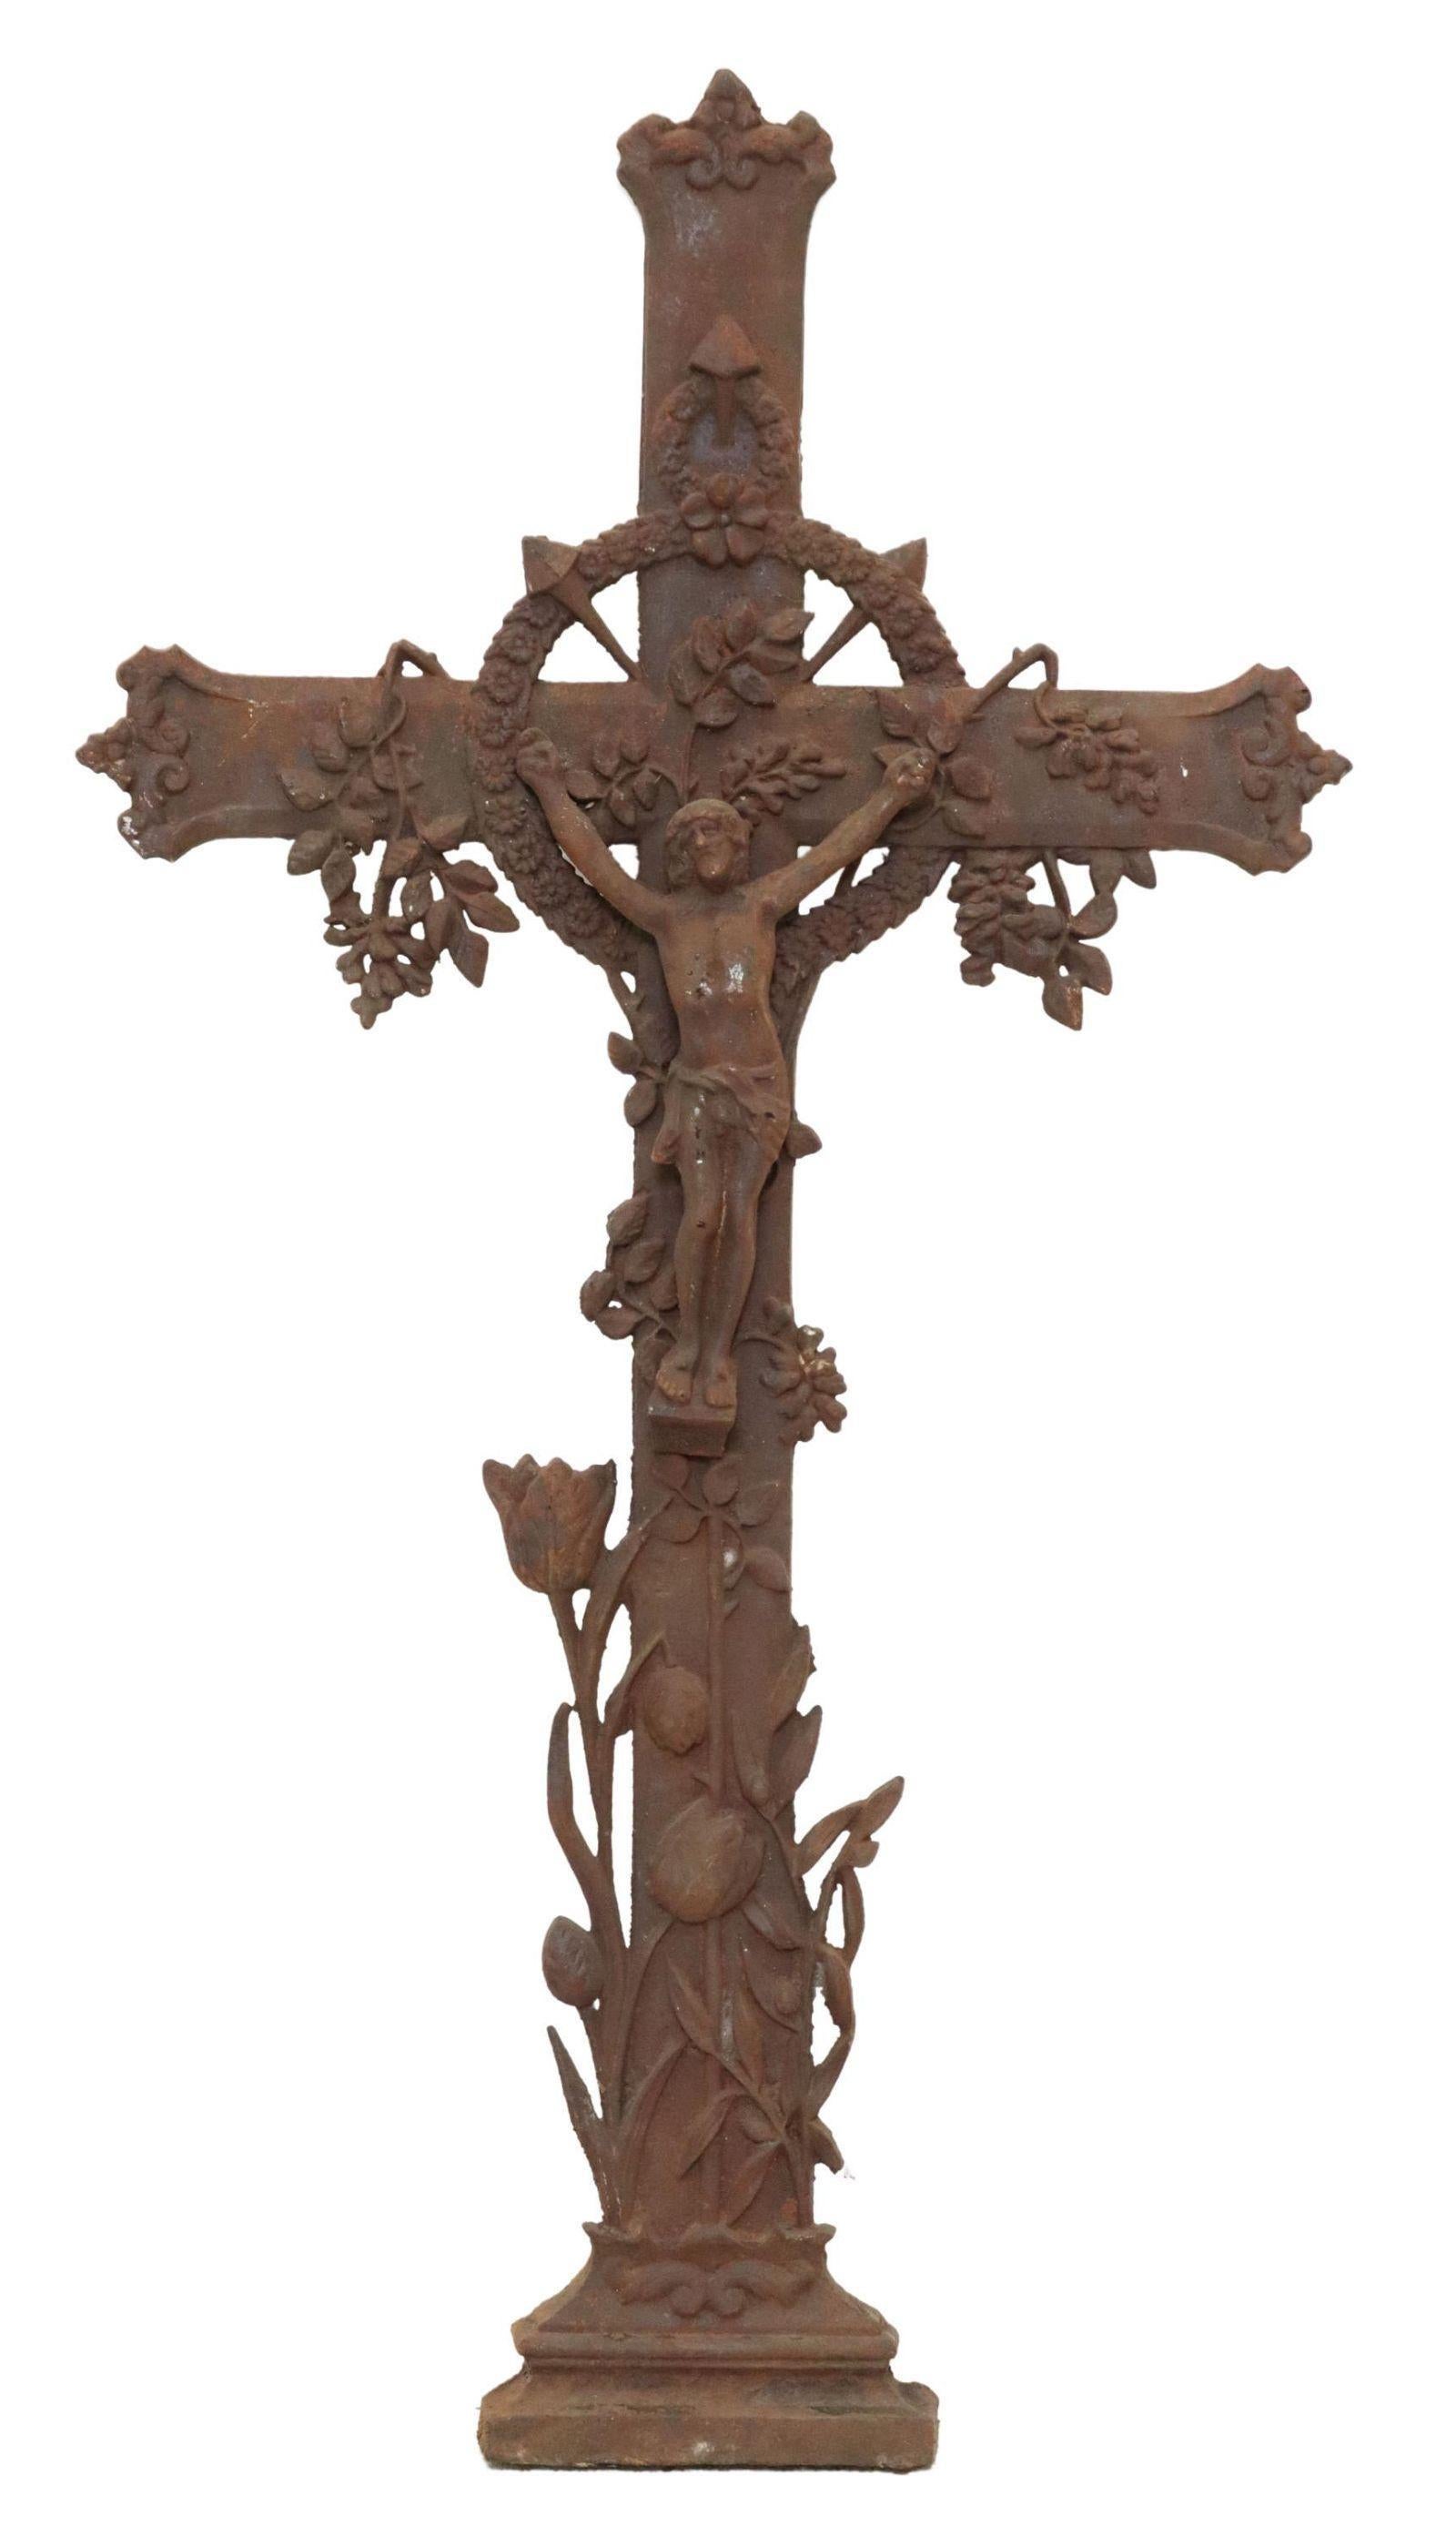 Antique French cast iron crucifix cross, 19th c., having foliate wreath, vining flowers, centering Corpus Christi, over tulips at the base.

Dimensions
approx 47.5